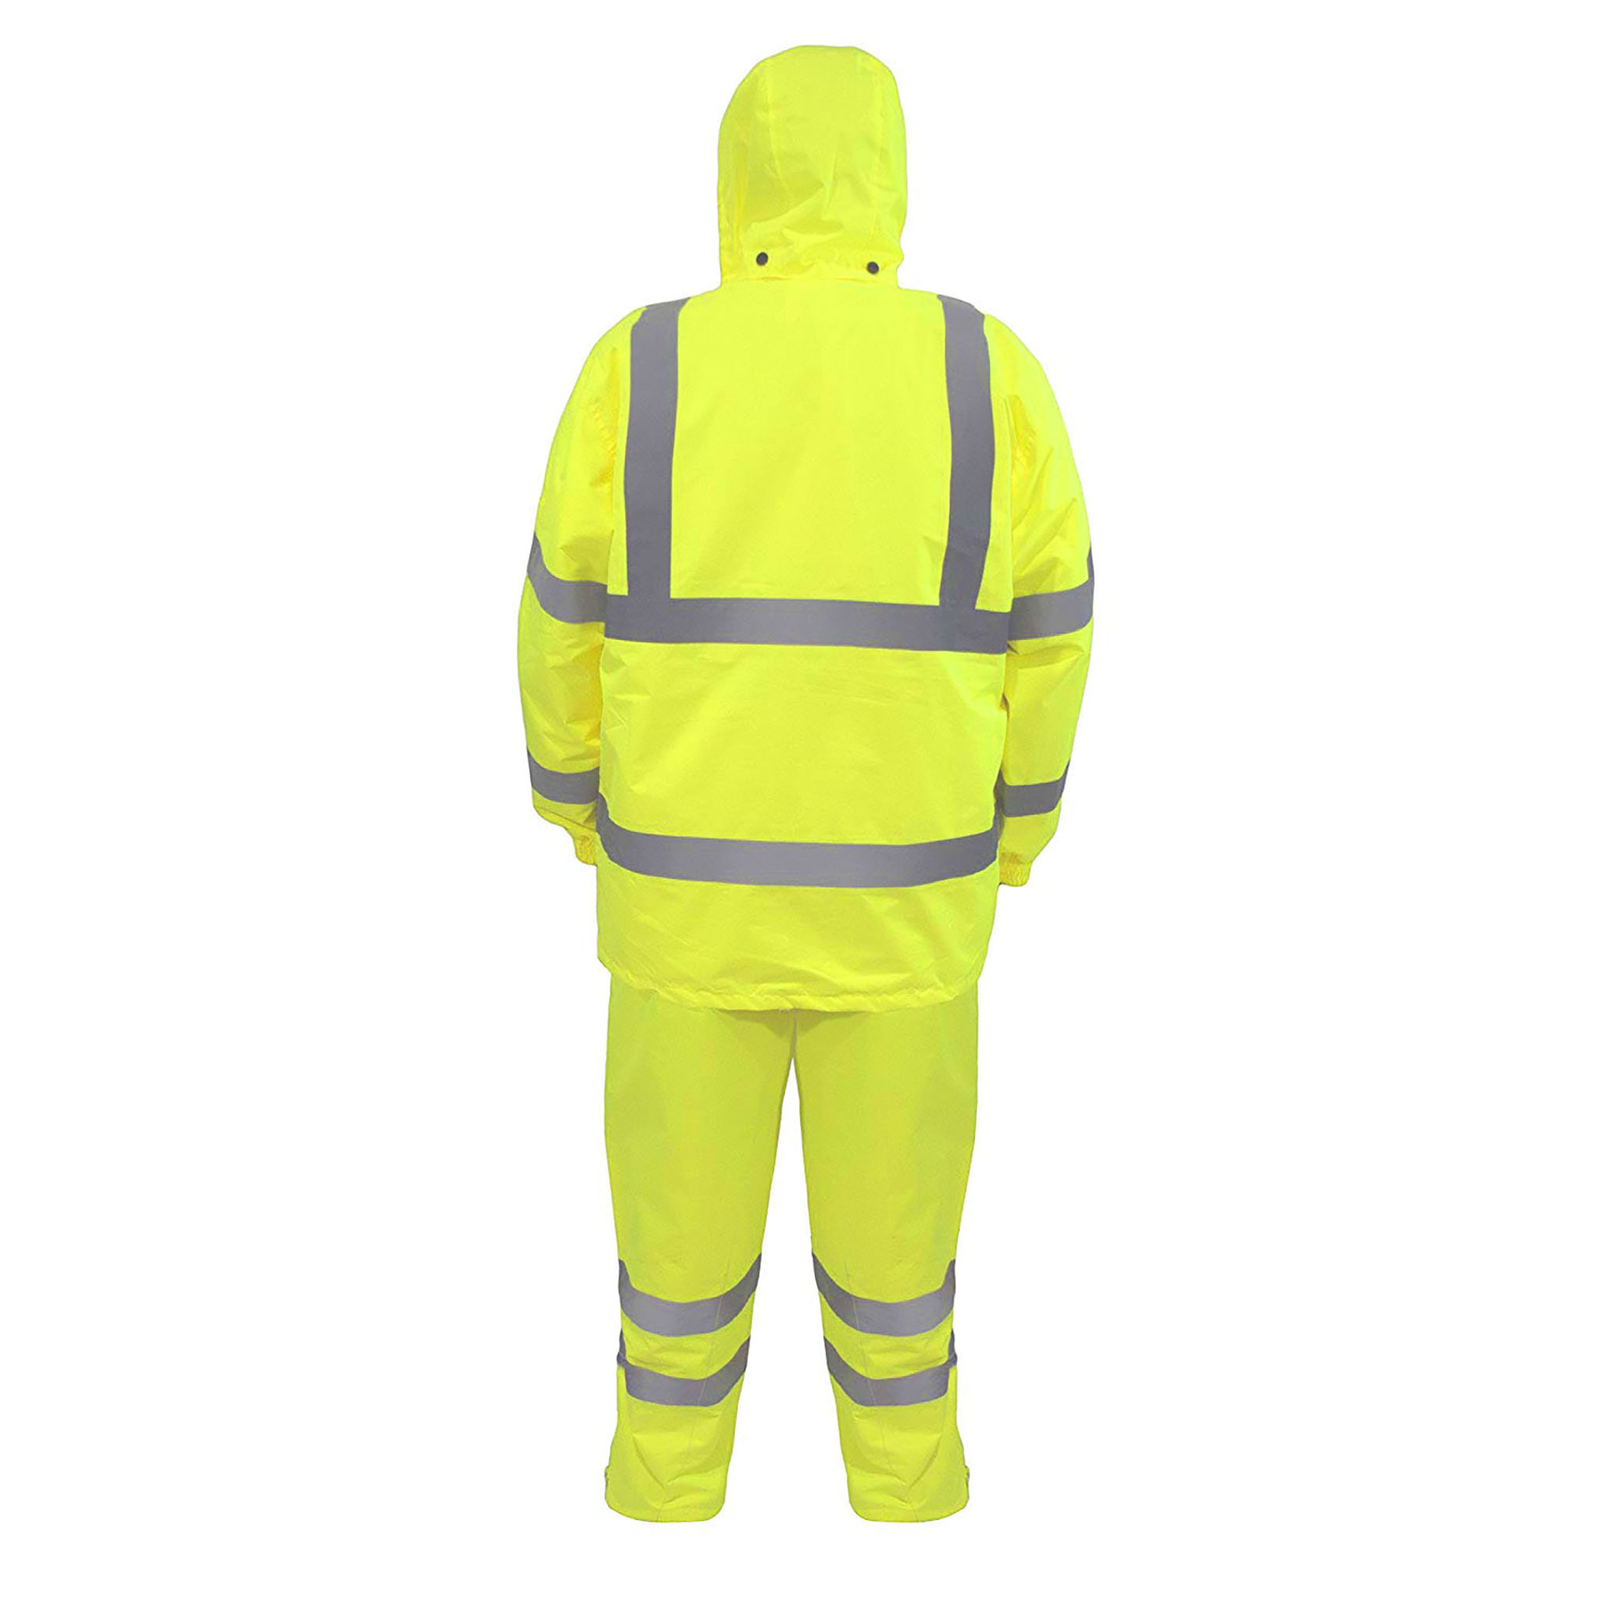 Back of the hi vis yellow JORESTECH rain set with reflective tapes to increase visibility